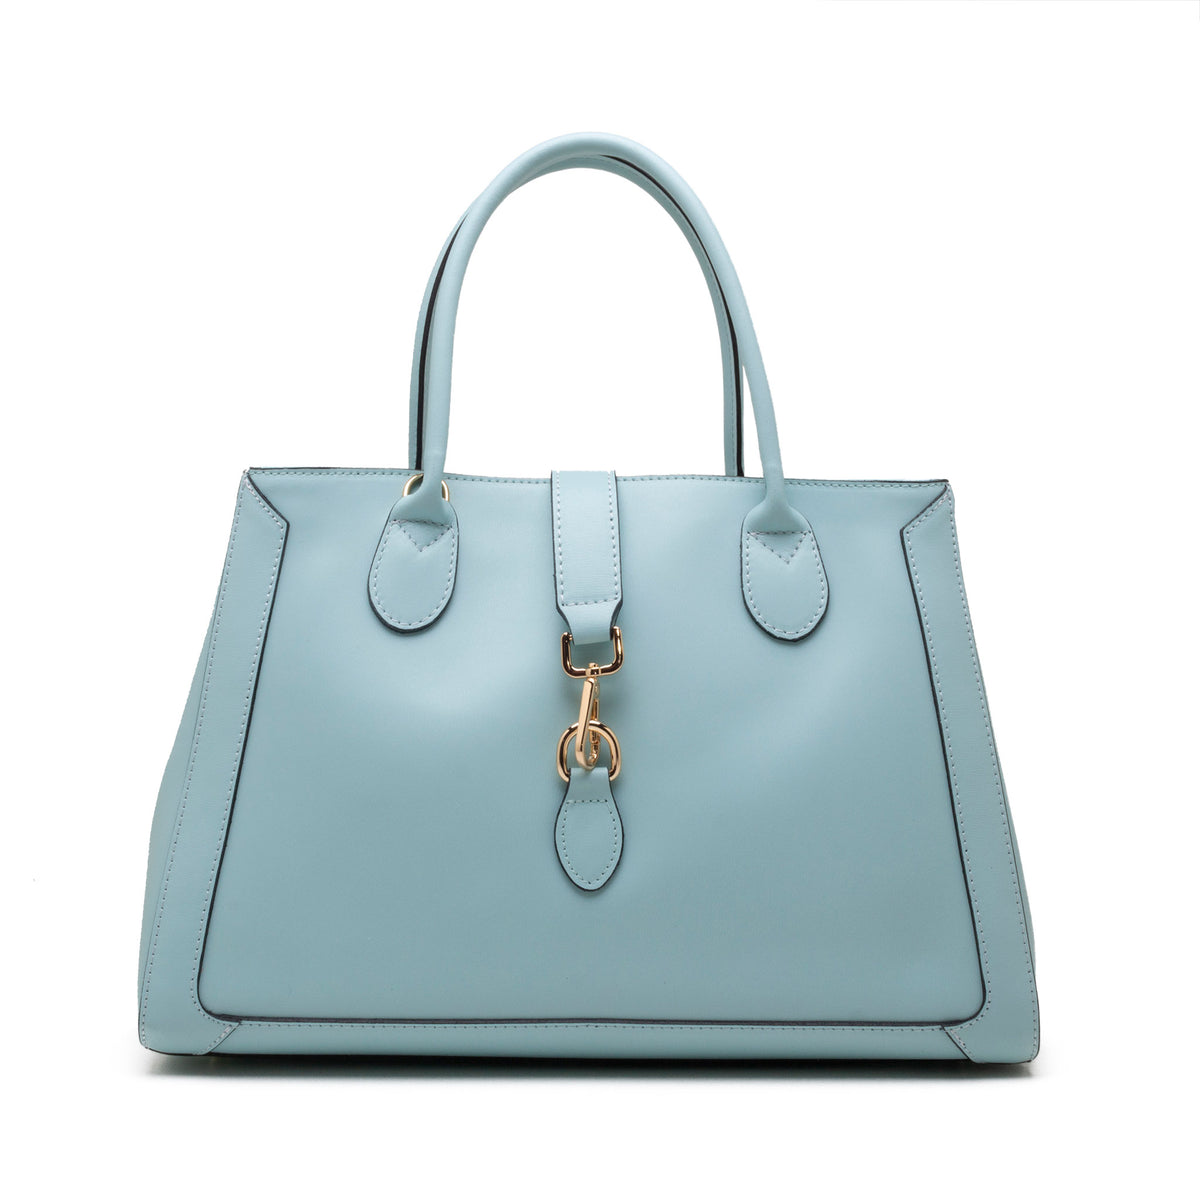 pearl_satchel_bag_turquoise_green